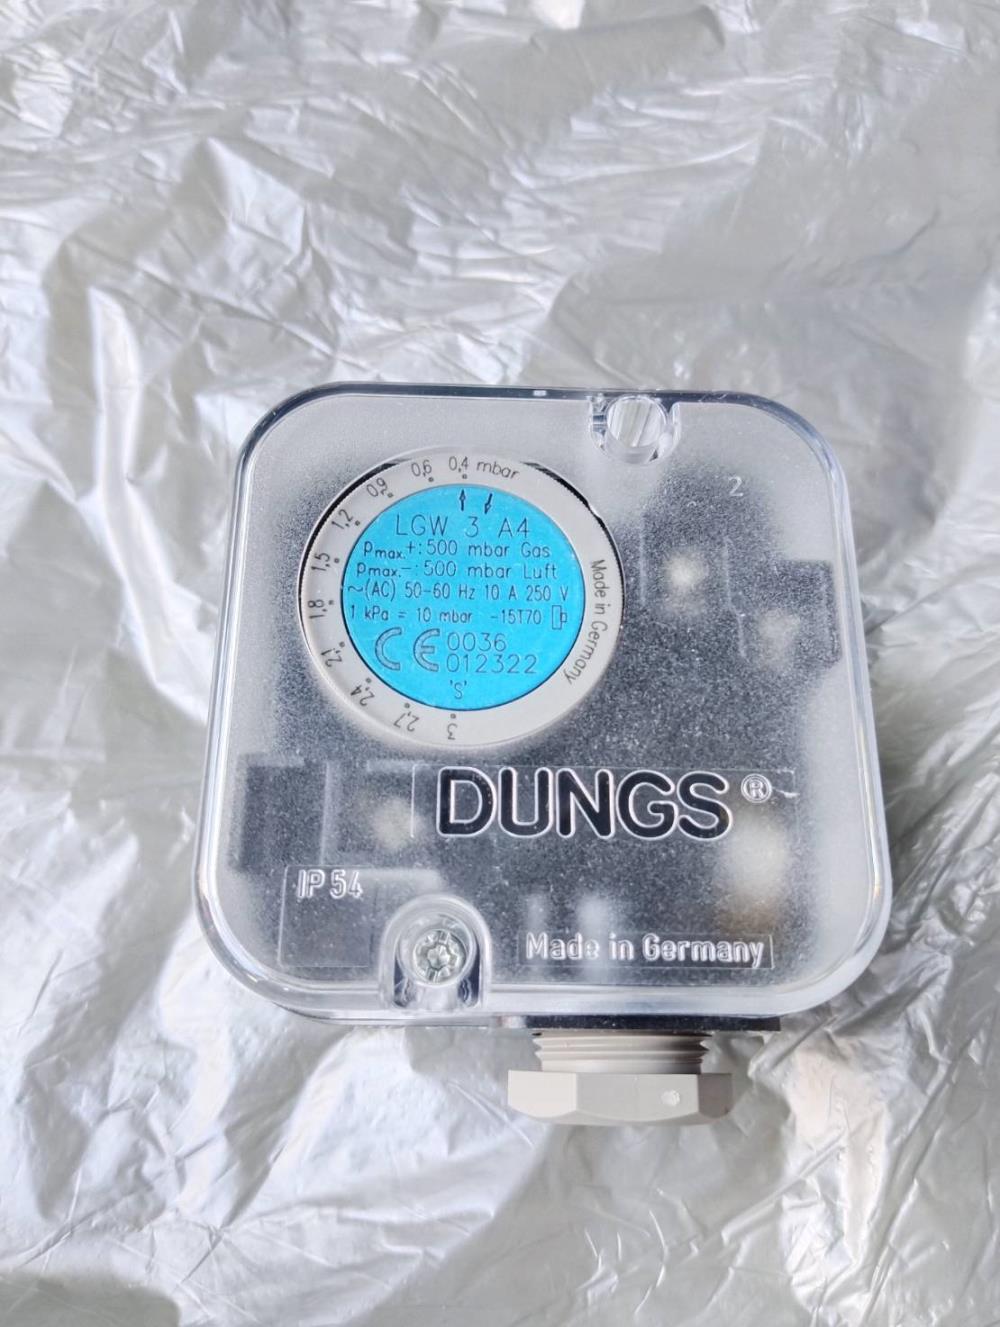 "DUNGS" Pressure Switch LGW 3 A4